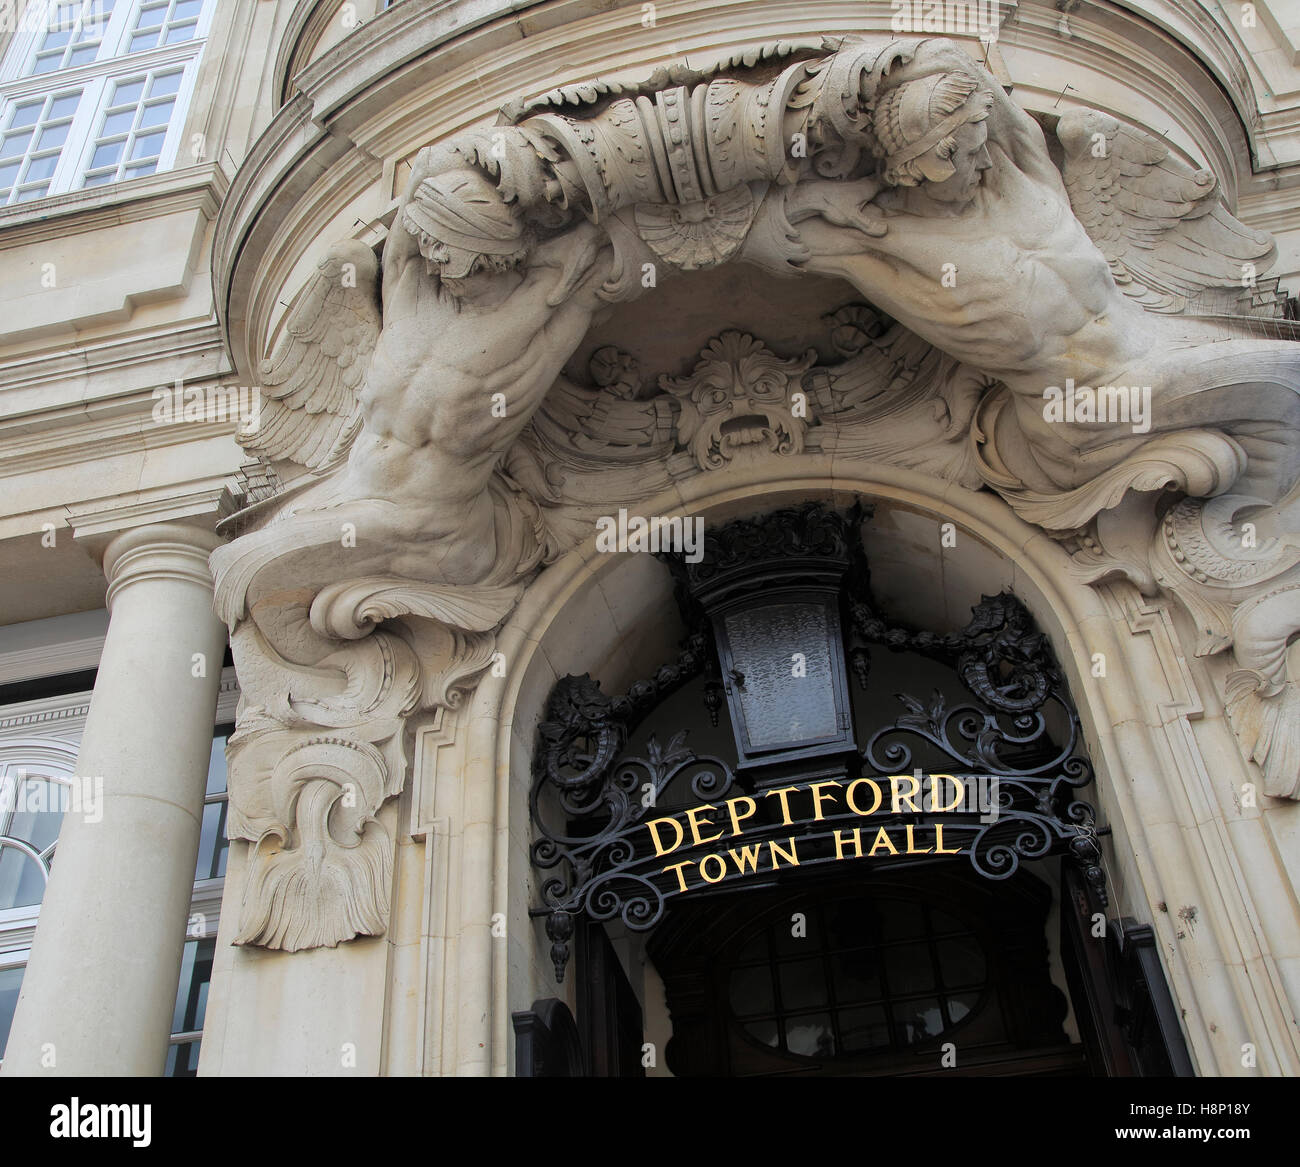 Entrance to town hall, Deptford, south London, England, UK built 1903-05 architectural sculpture by Henry Poole. Stock Photo